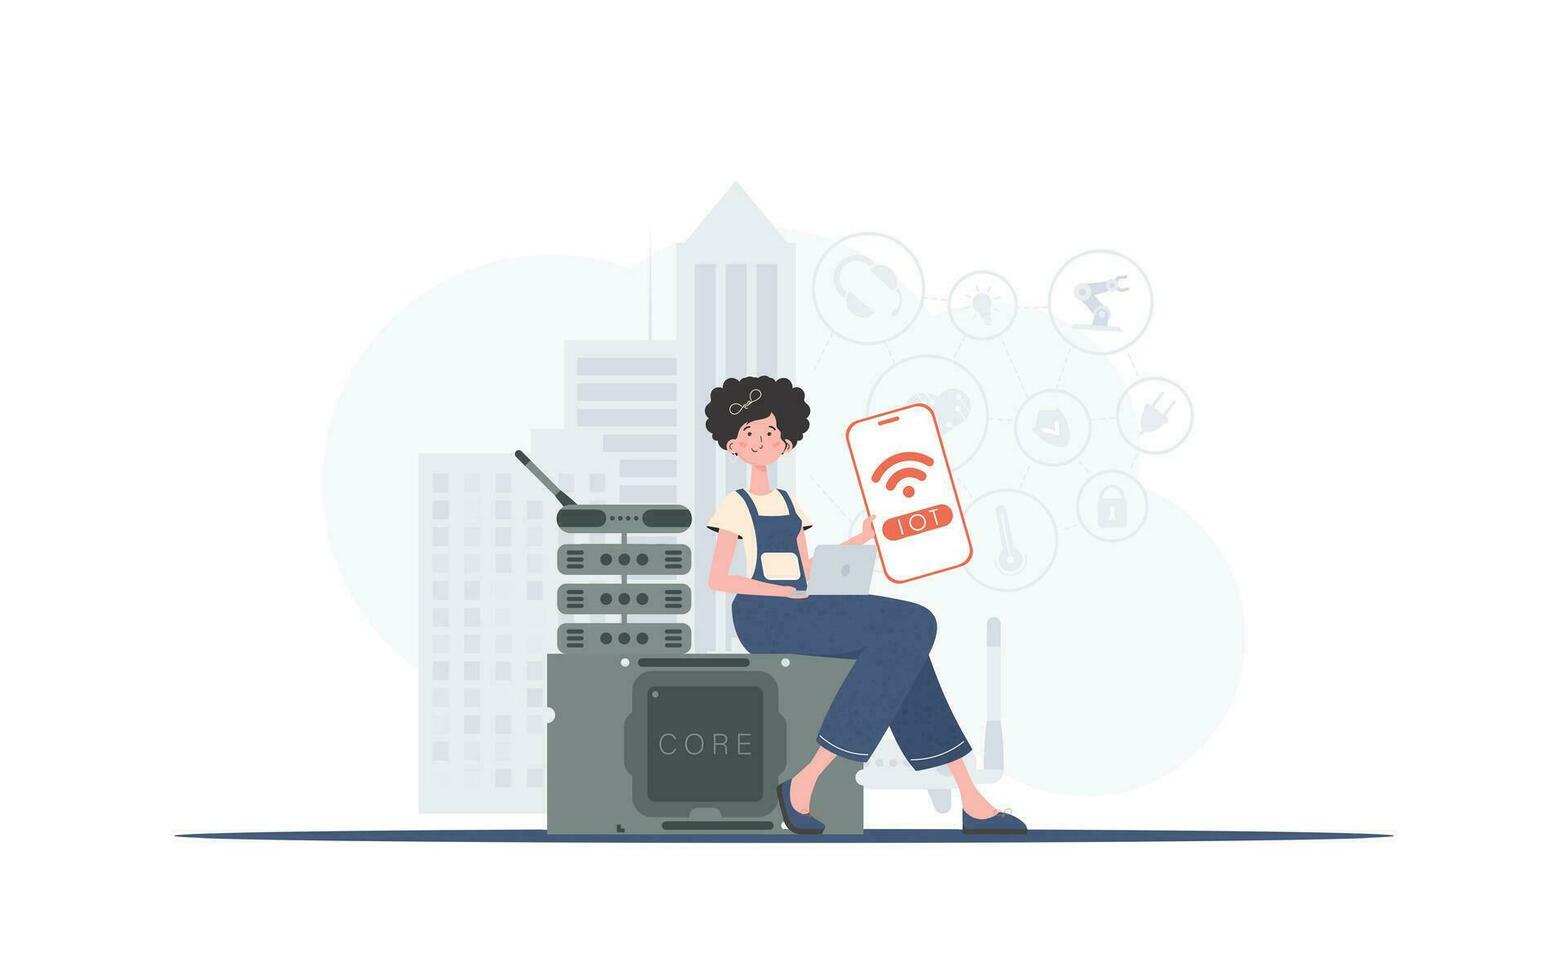 Internet of things concept. The girl is holding a phone with the IoT logo in her hands. Vector illustration in flat style.